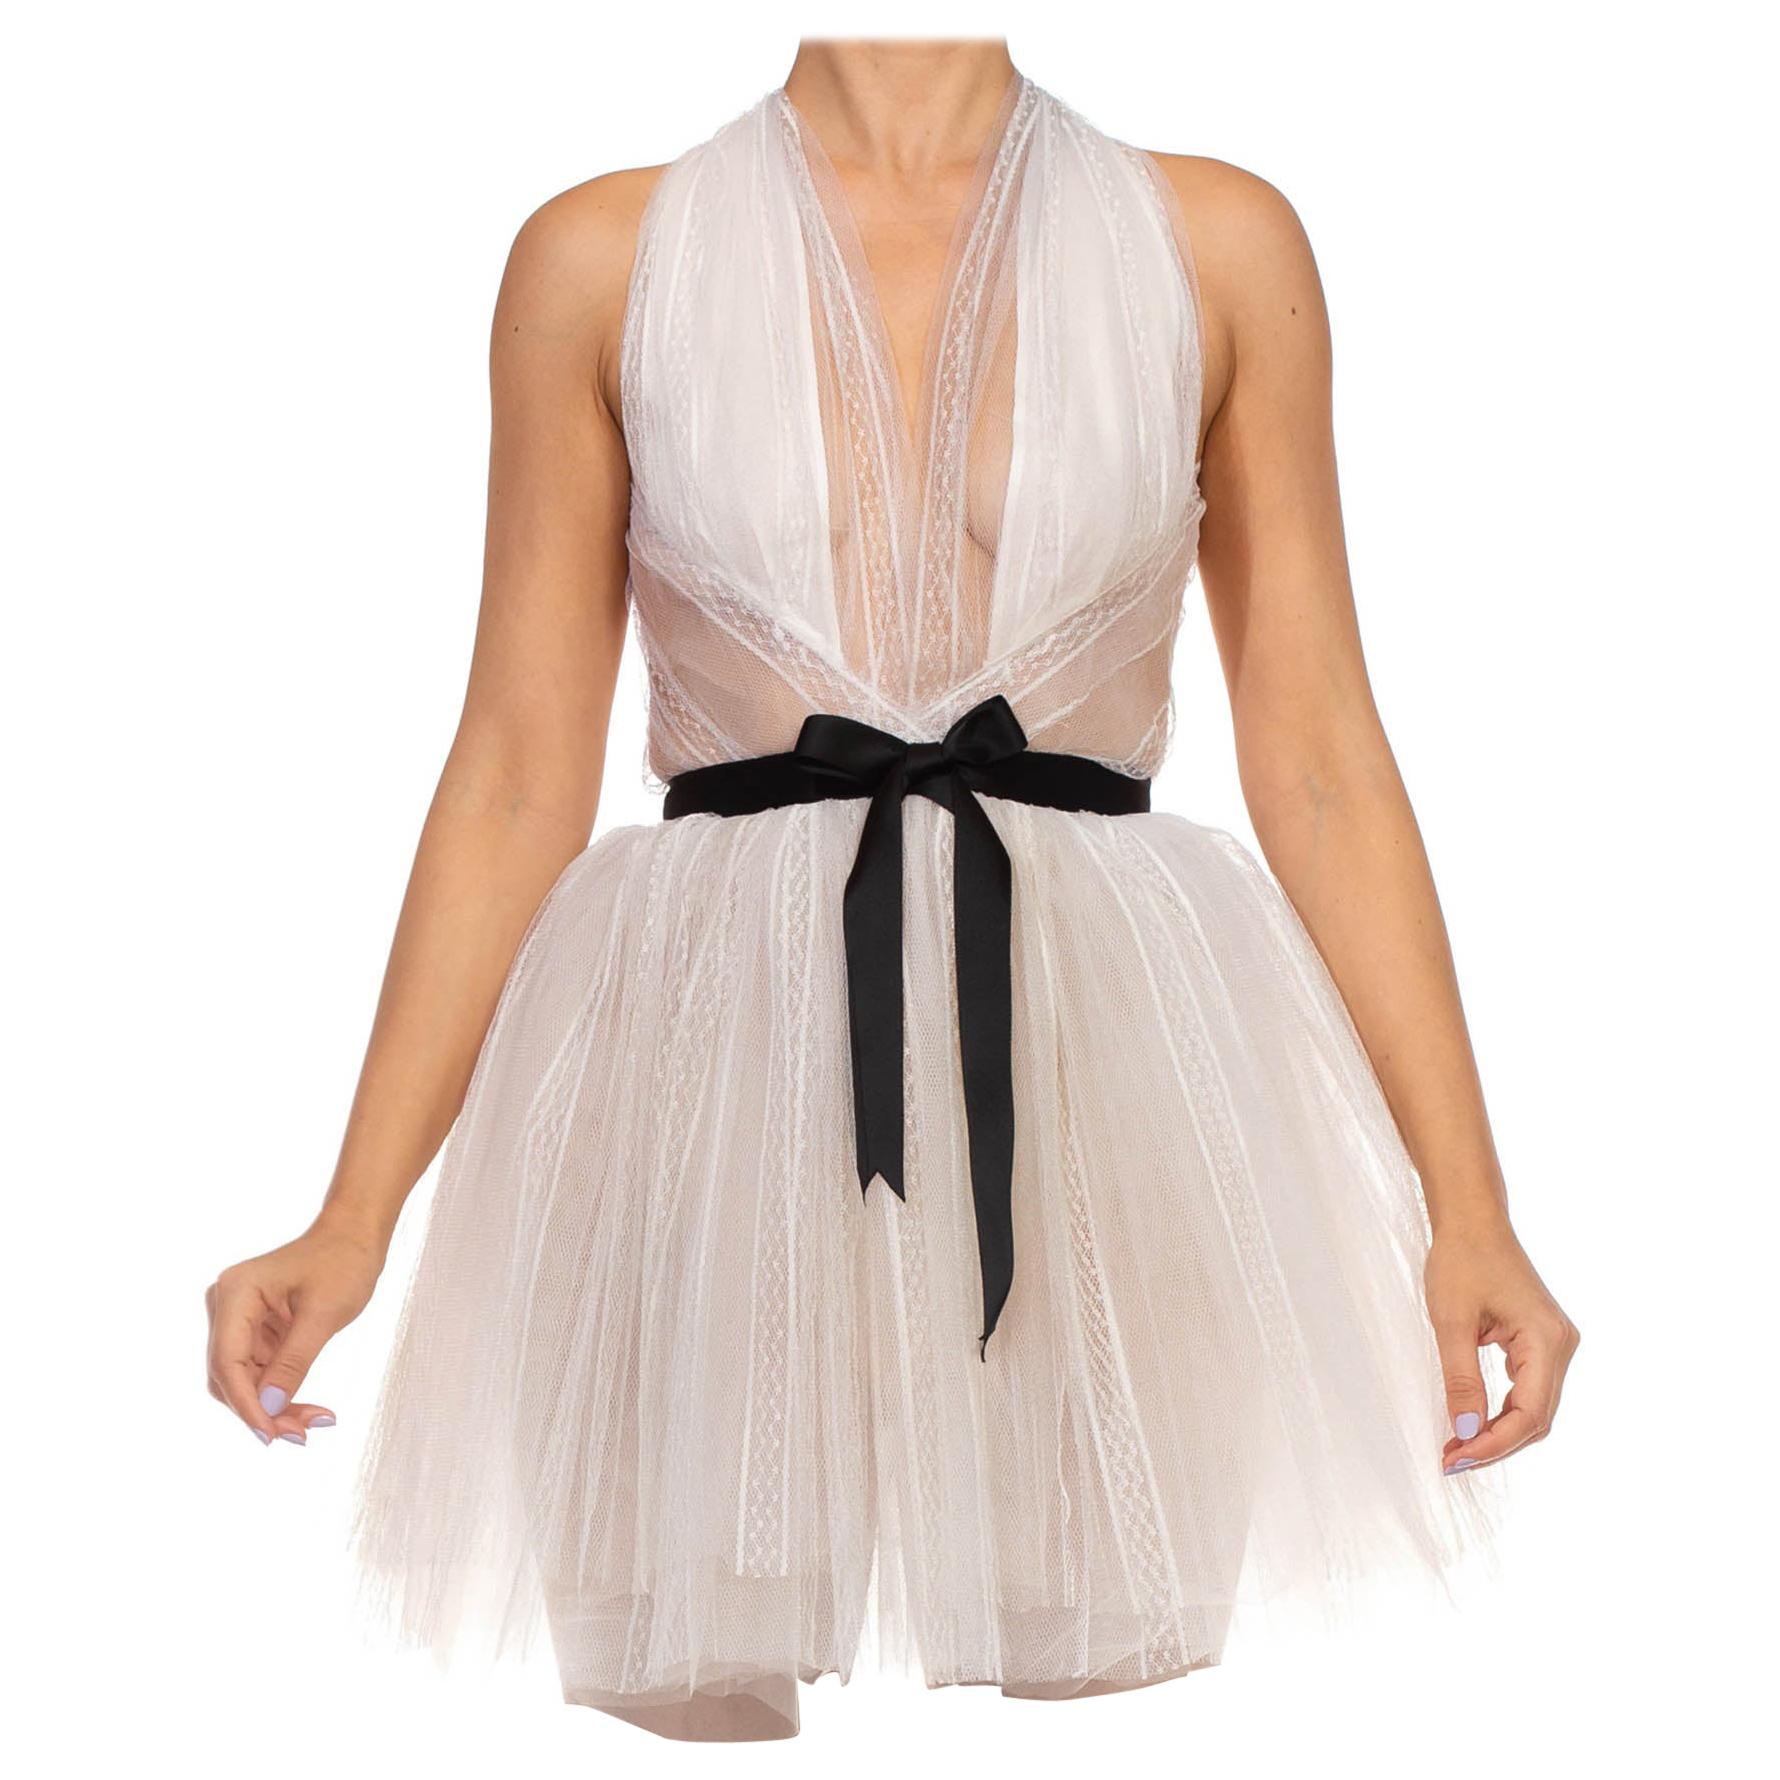 MORPHEW COLLECTION White Tulle Mini Dress With Black Satin Bow